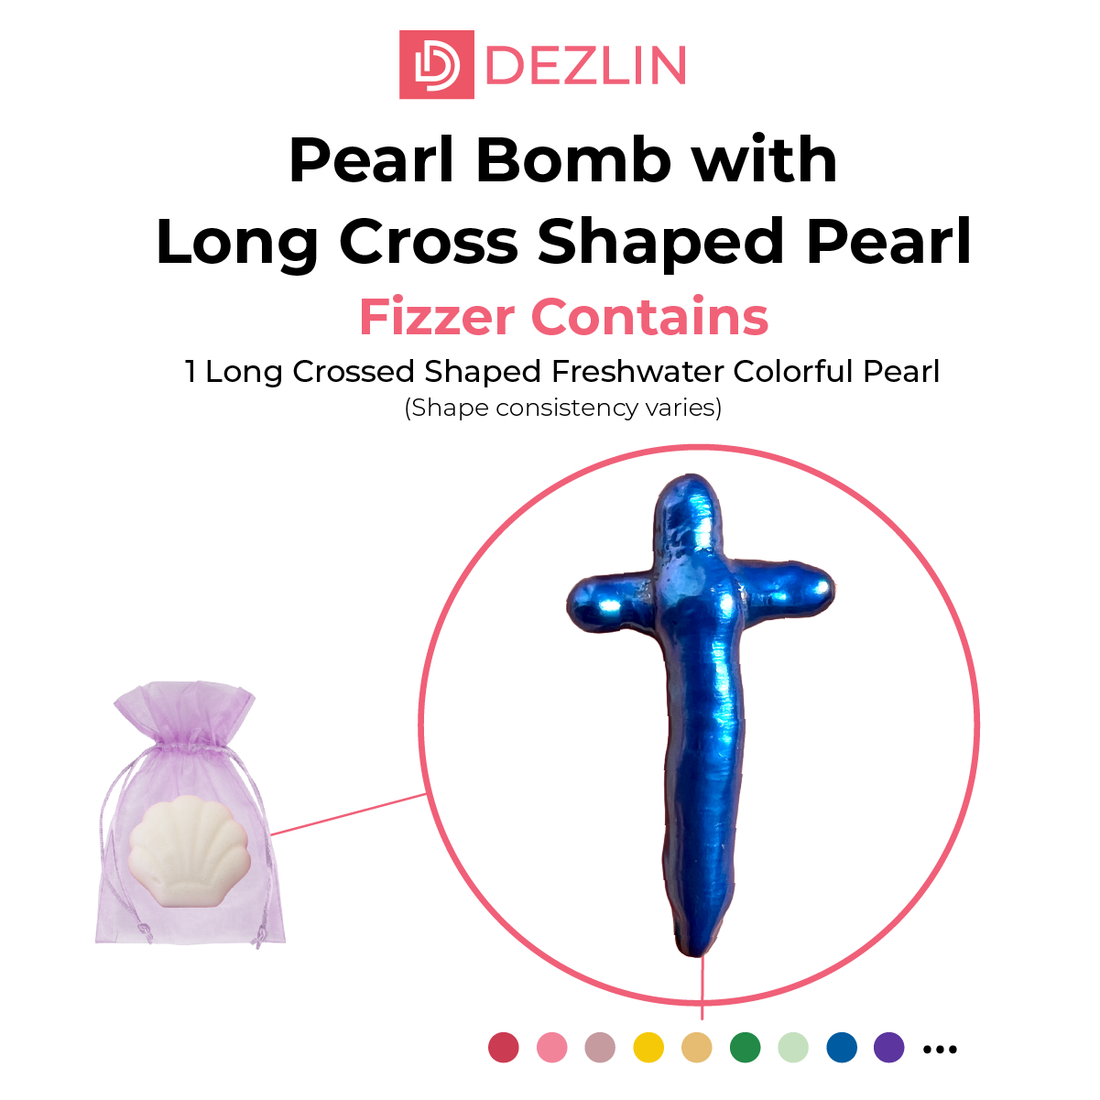 Pearl Bomb with Long Cross Shaped Pearl